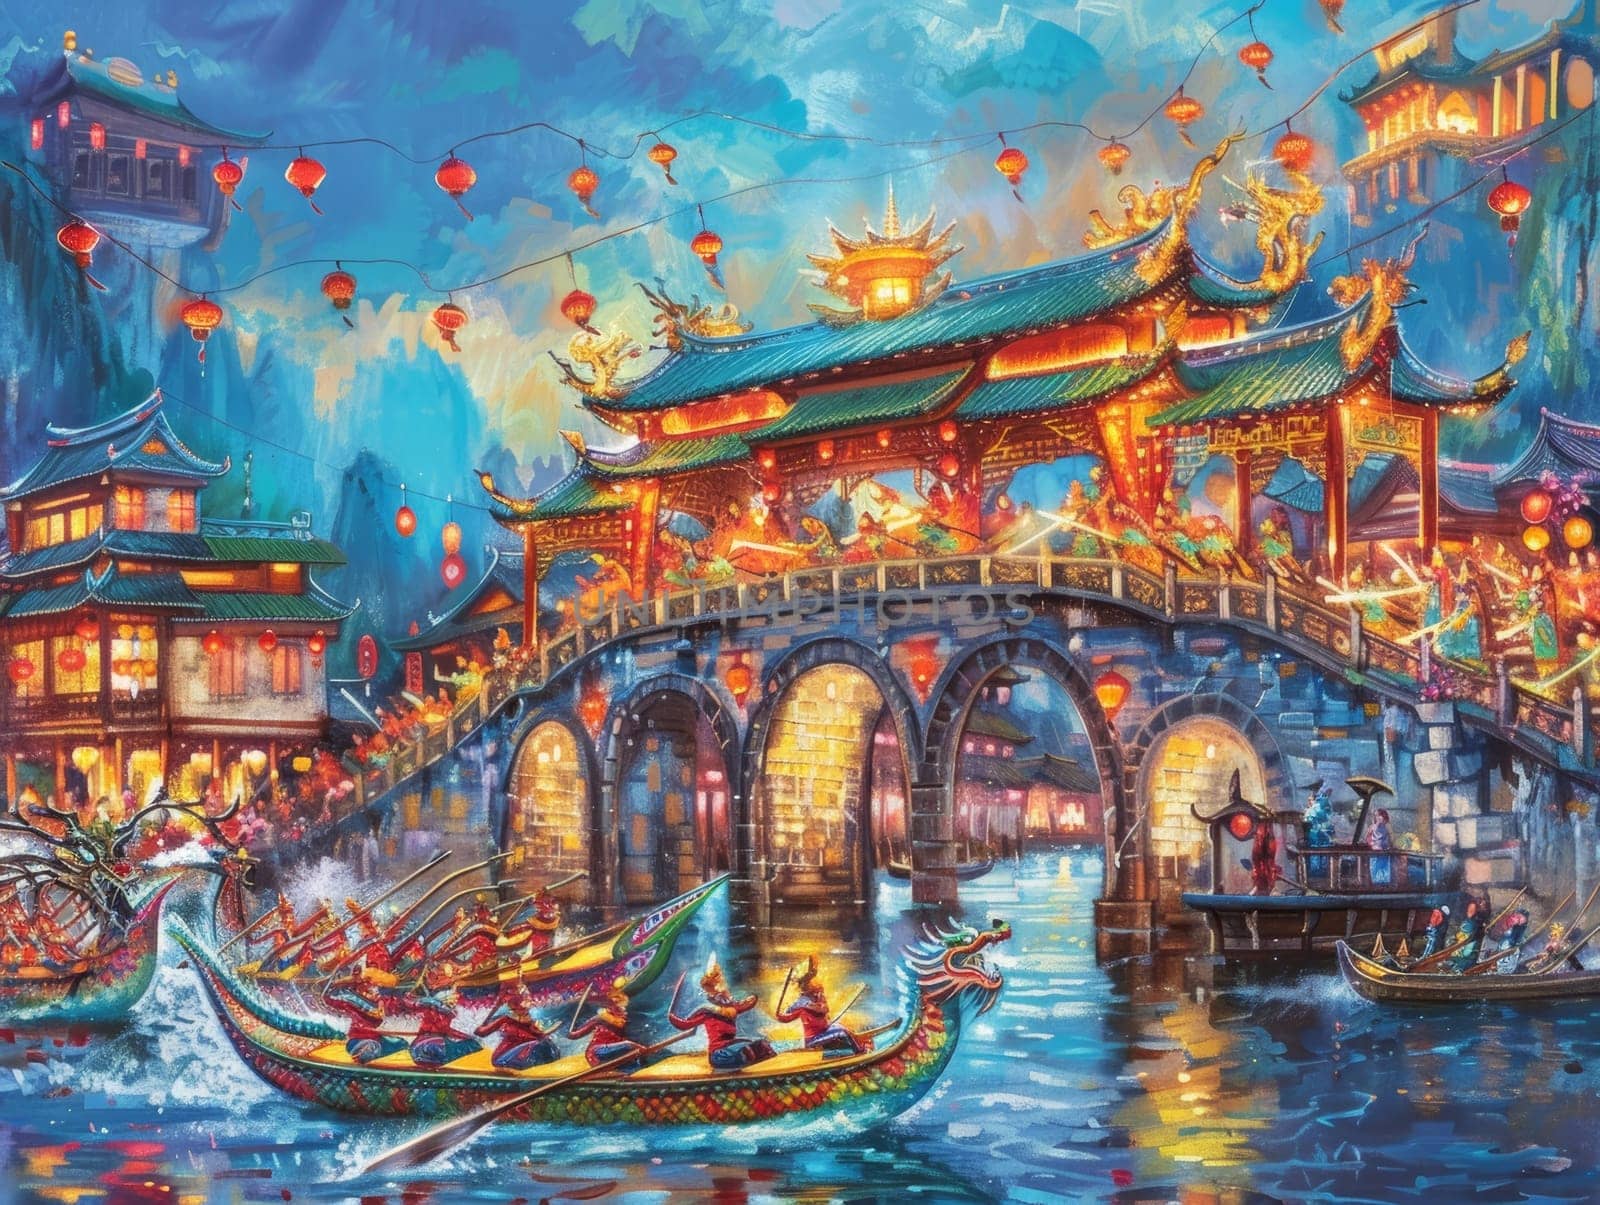 An enchanting evening view of a traditional bridge with vibrant red lanterns and dragon boats racing on a river, reflecting the festivity of an Asian celebration